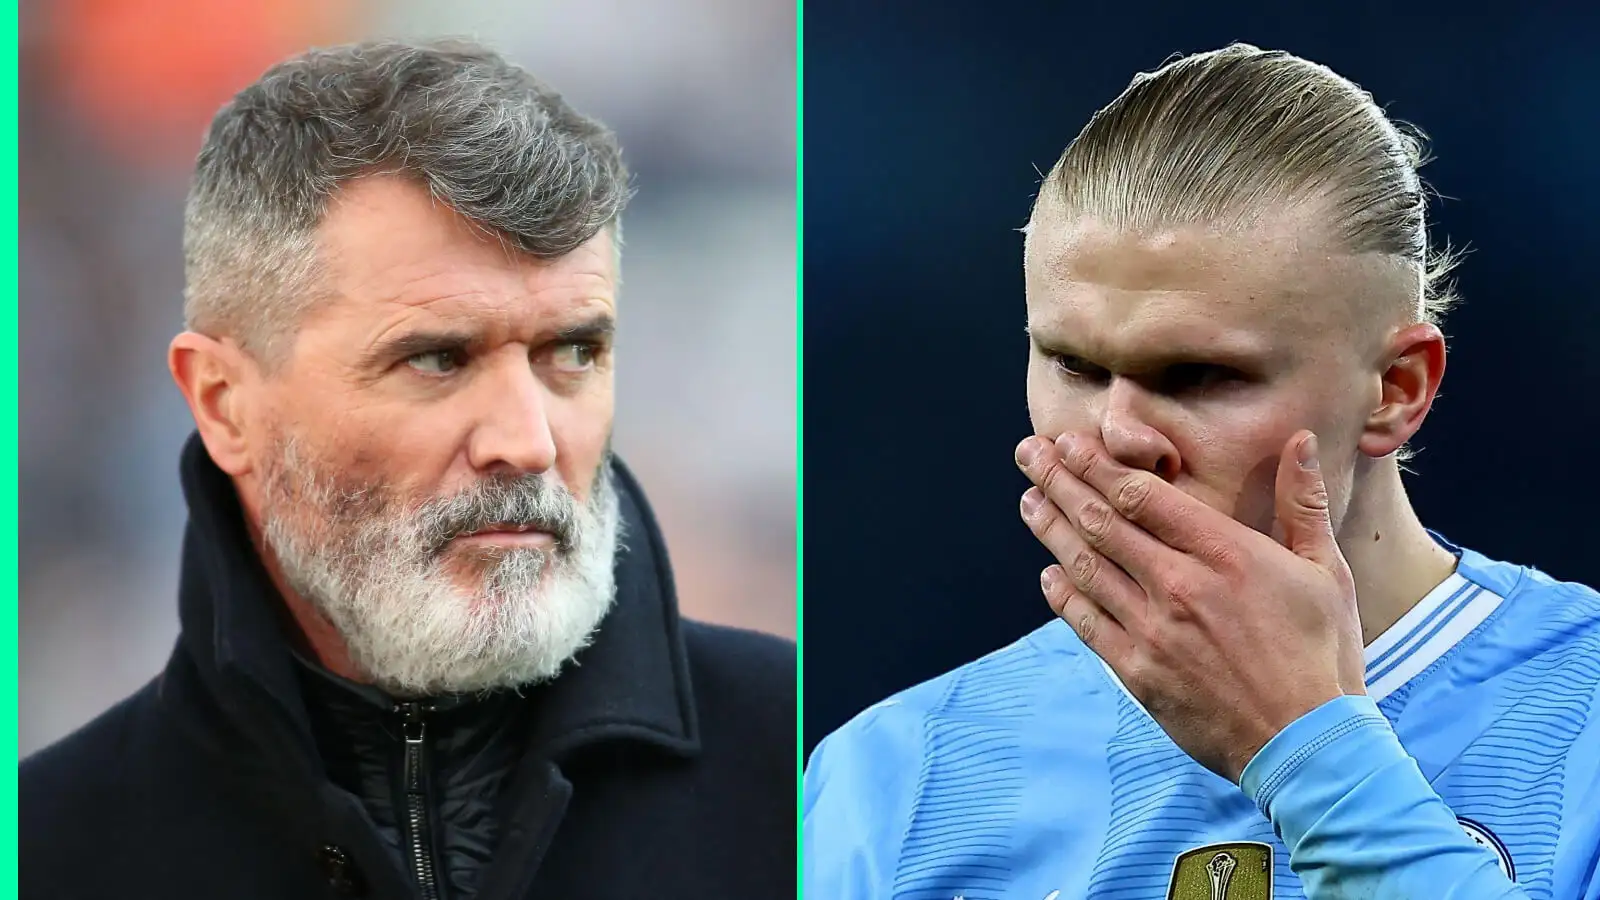 Roy Keane destroys Erling Haaland with brutal put-down, as Micah Richards reveals major red flag after Man City, Arsenal draw